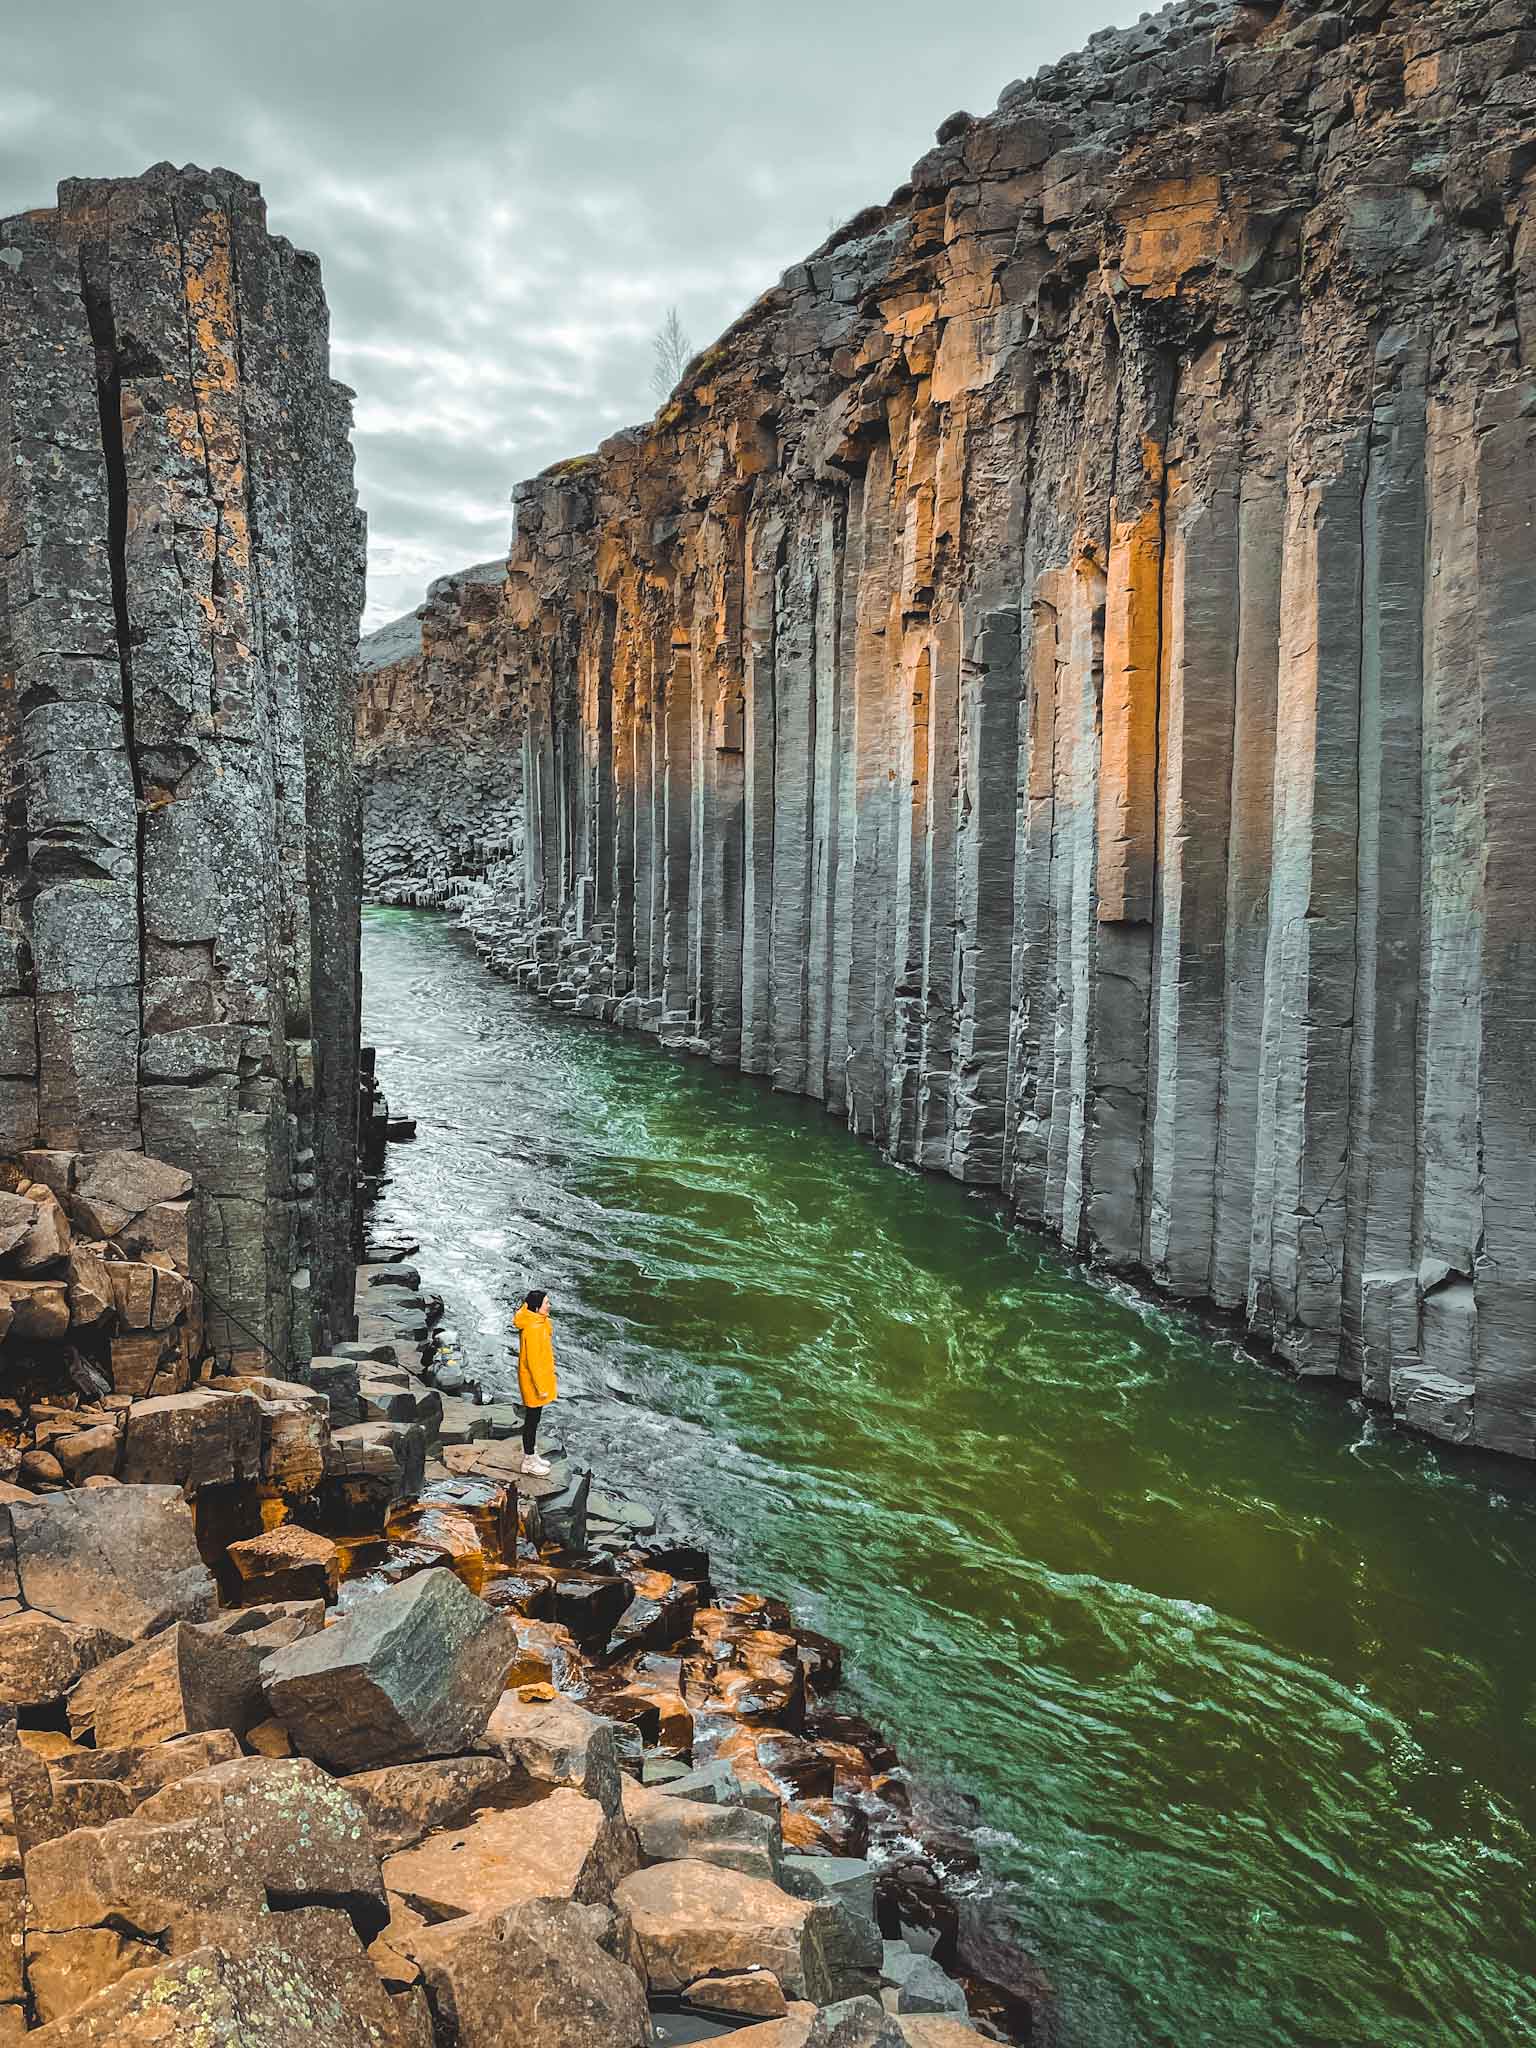 Studlagil canyon in iceland with the basalt columns